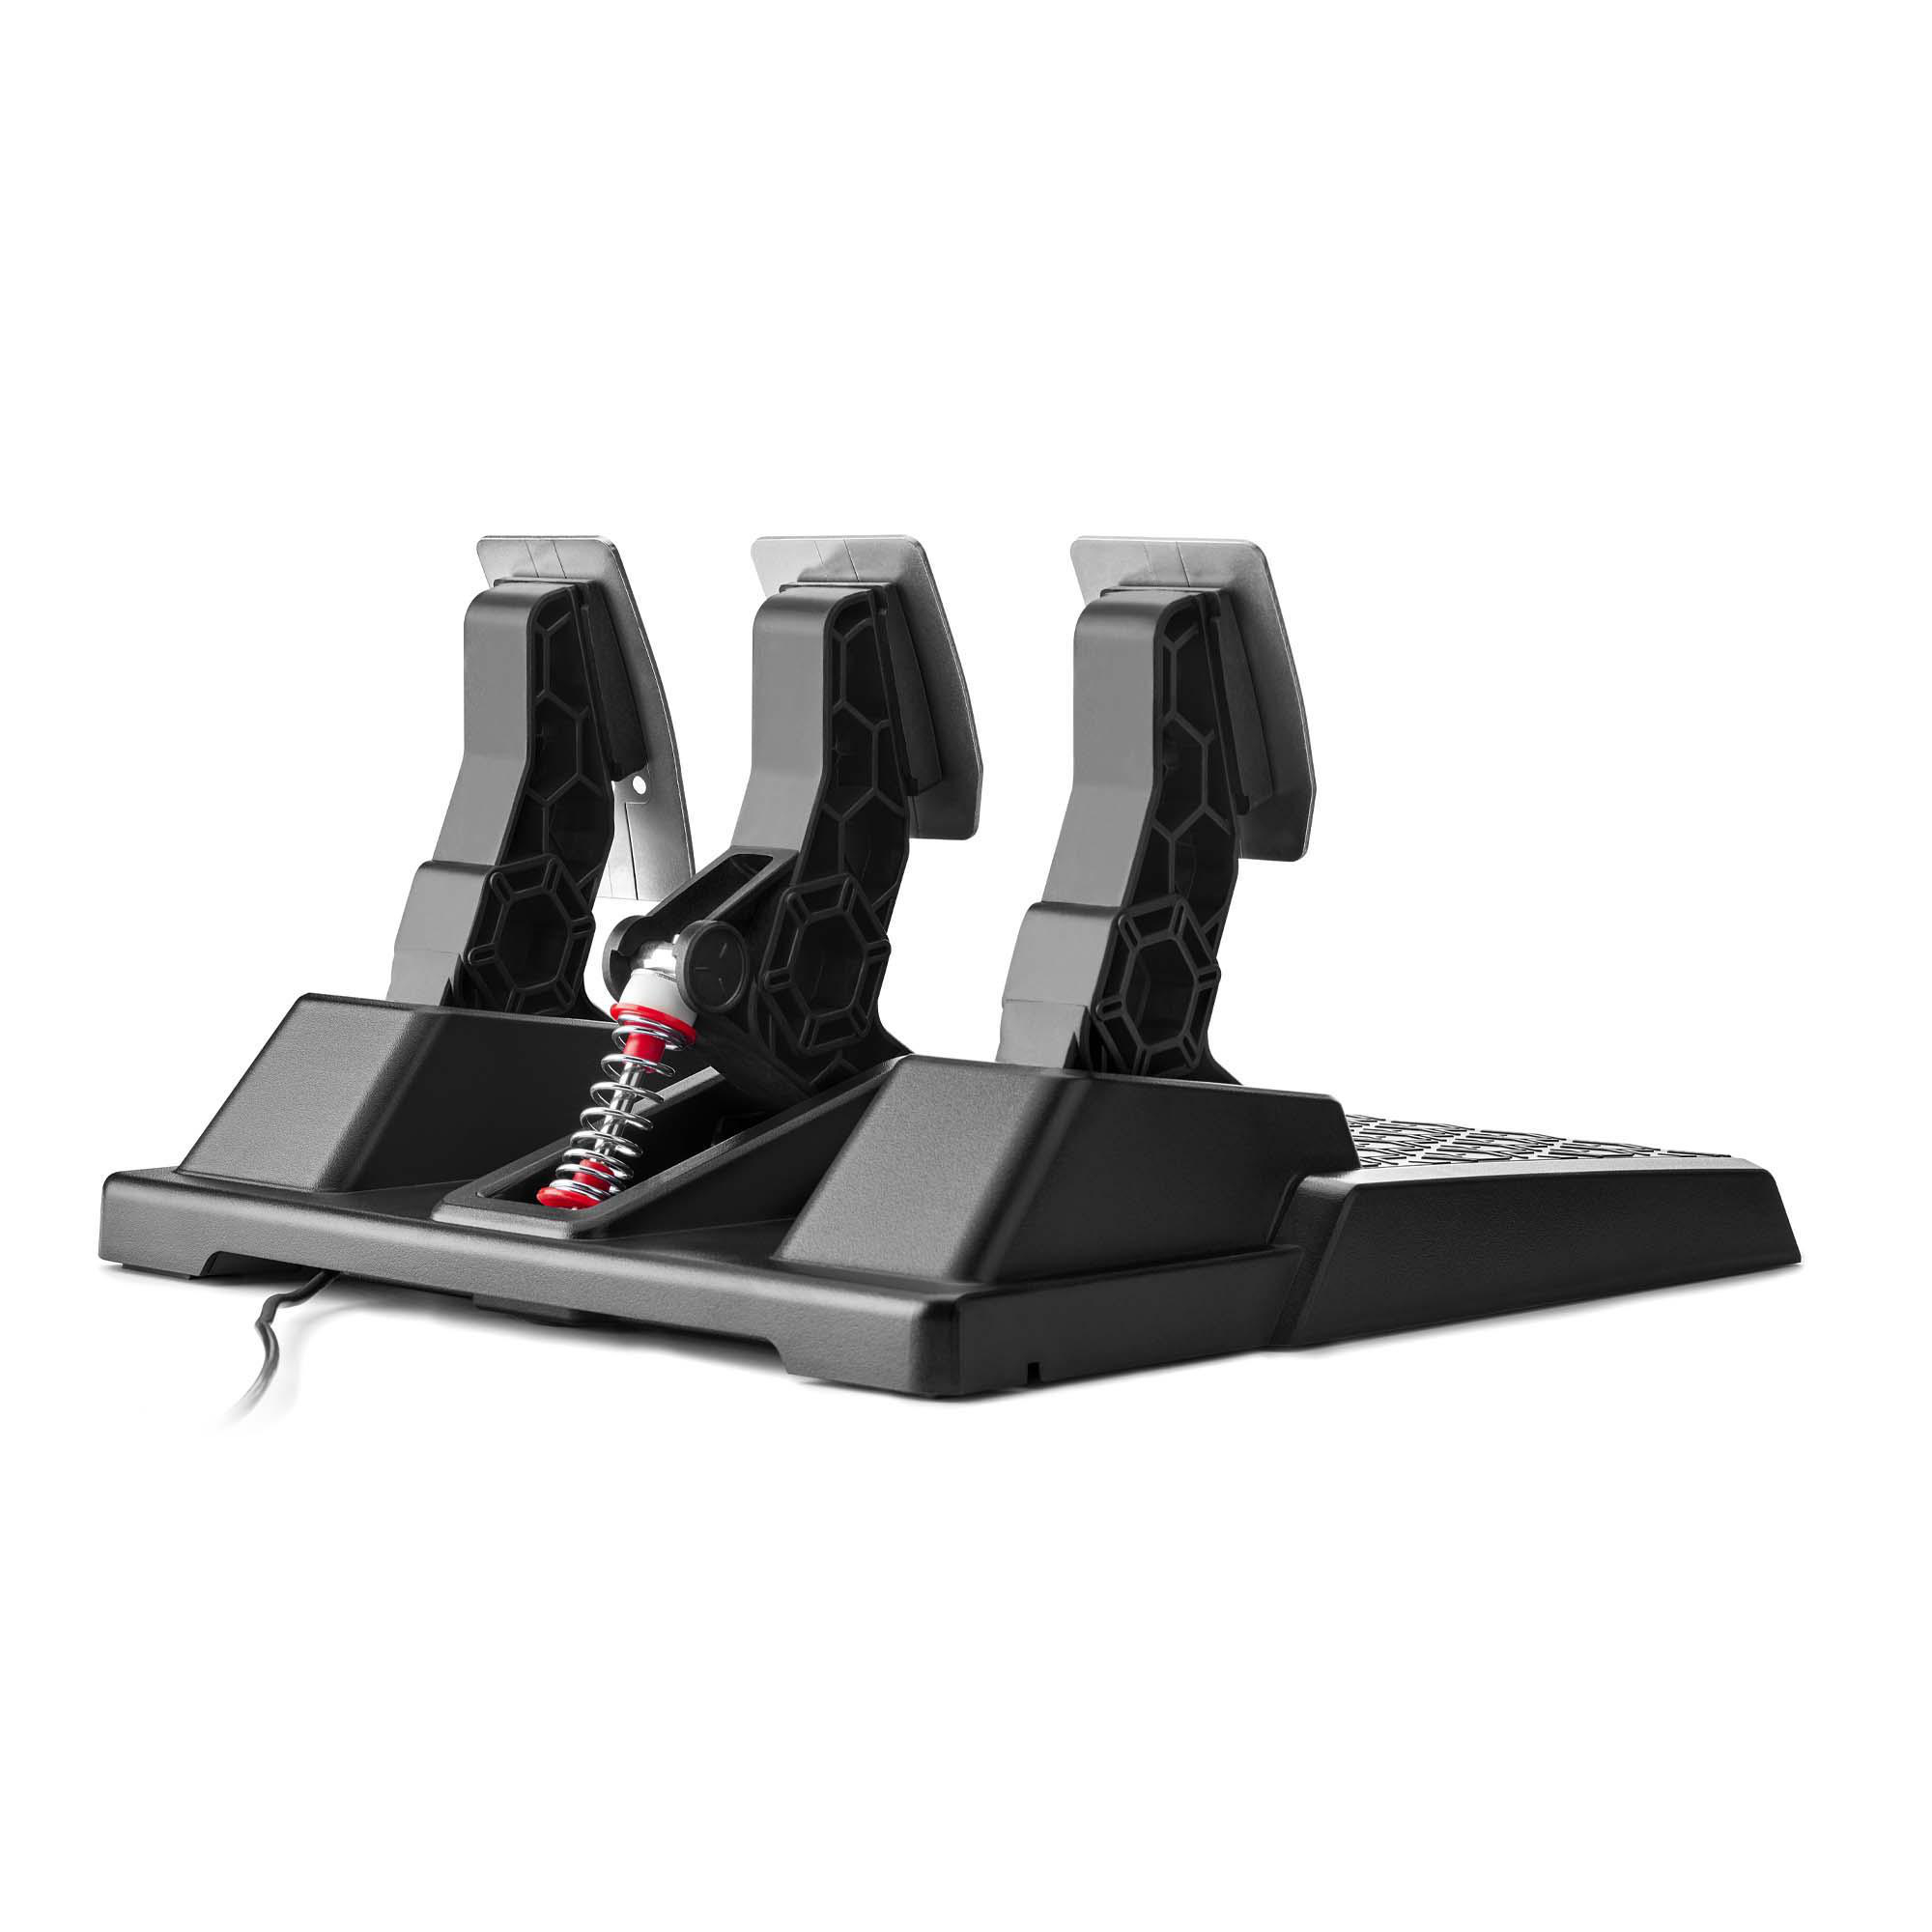 T3PM: THRUSTMASTER Pedal Magnetic 3 Thrustmaster